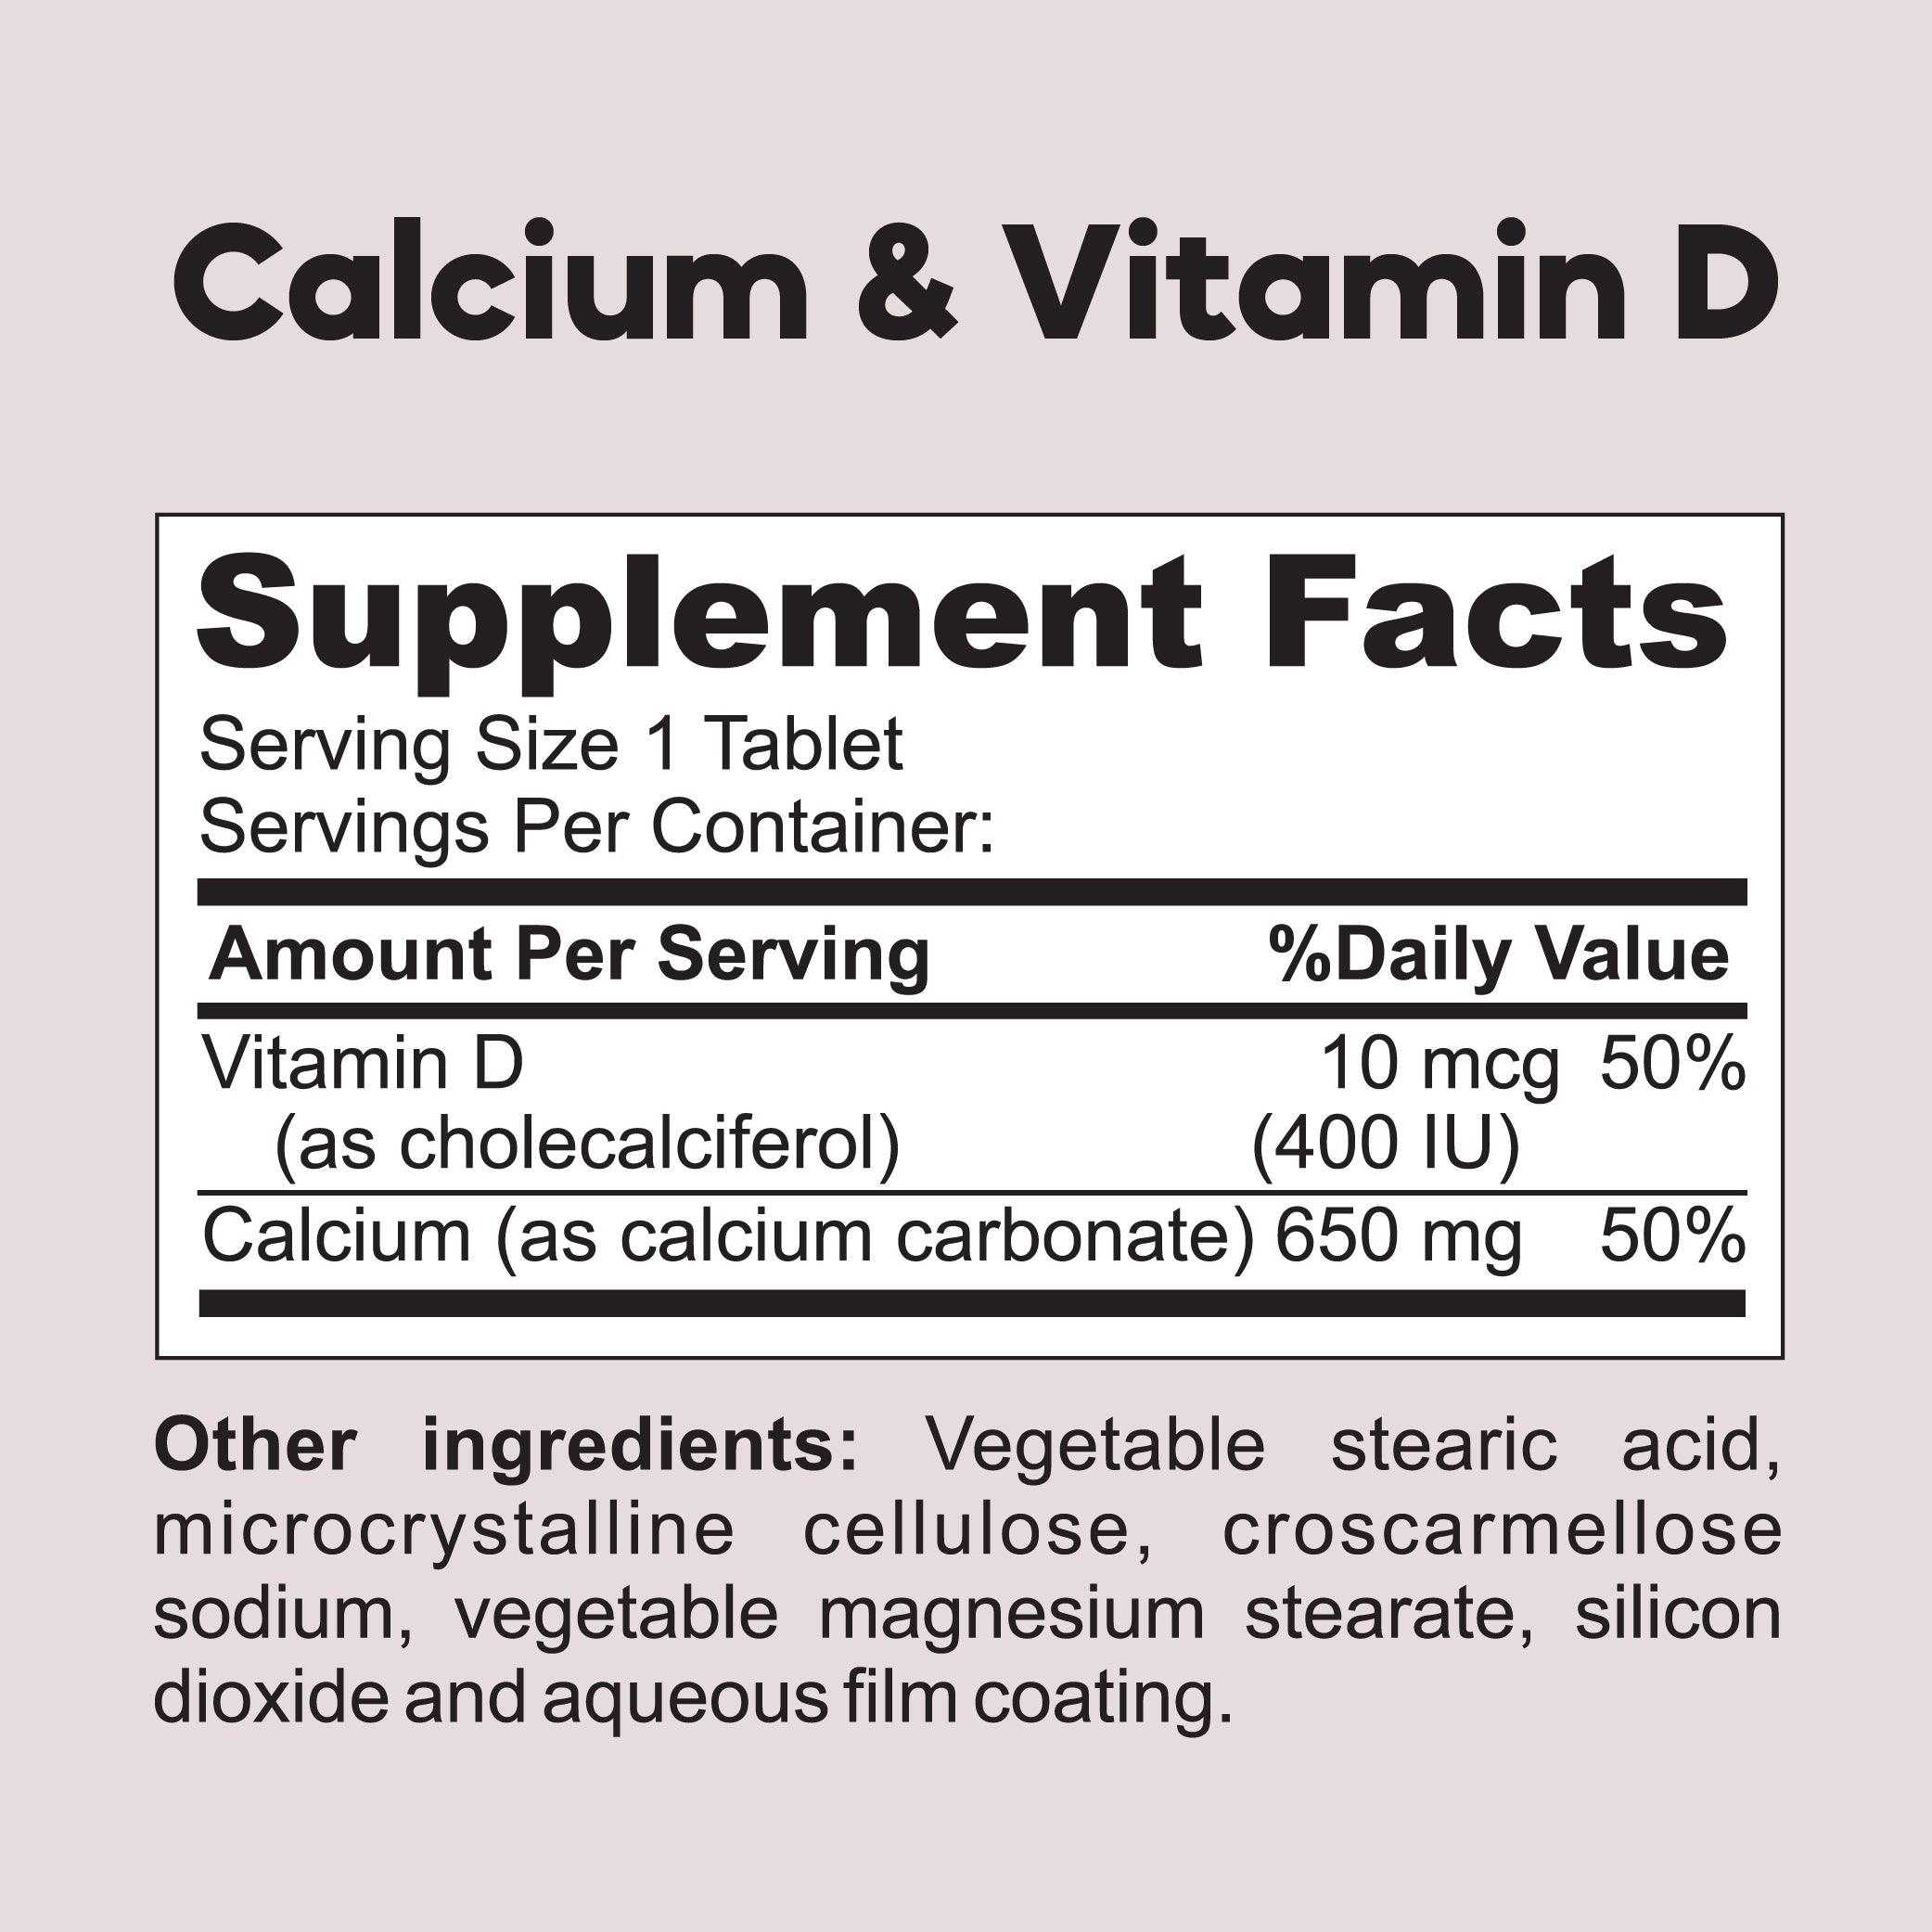 Calcium & Vitamin D - Muscle, Bone, and Joint Support - 120 Tablet - Kaitamin